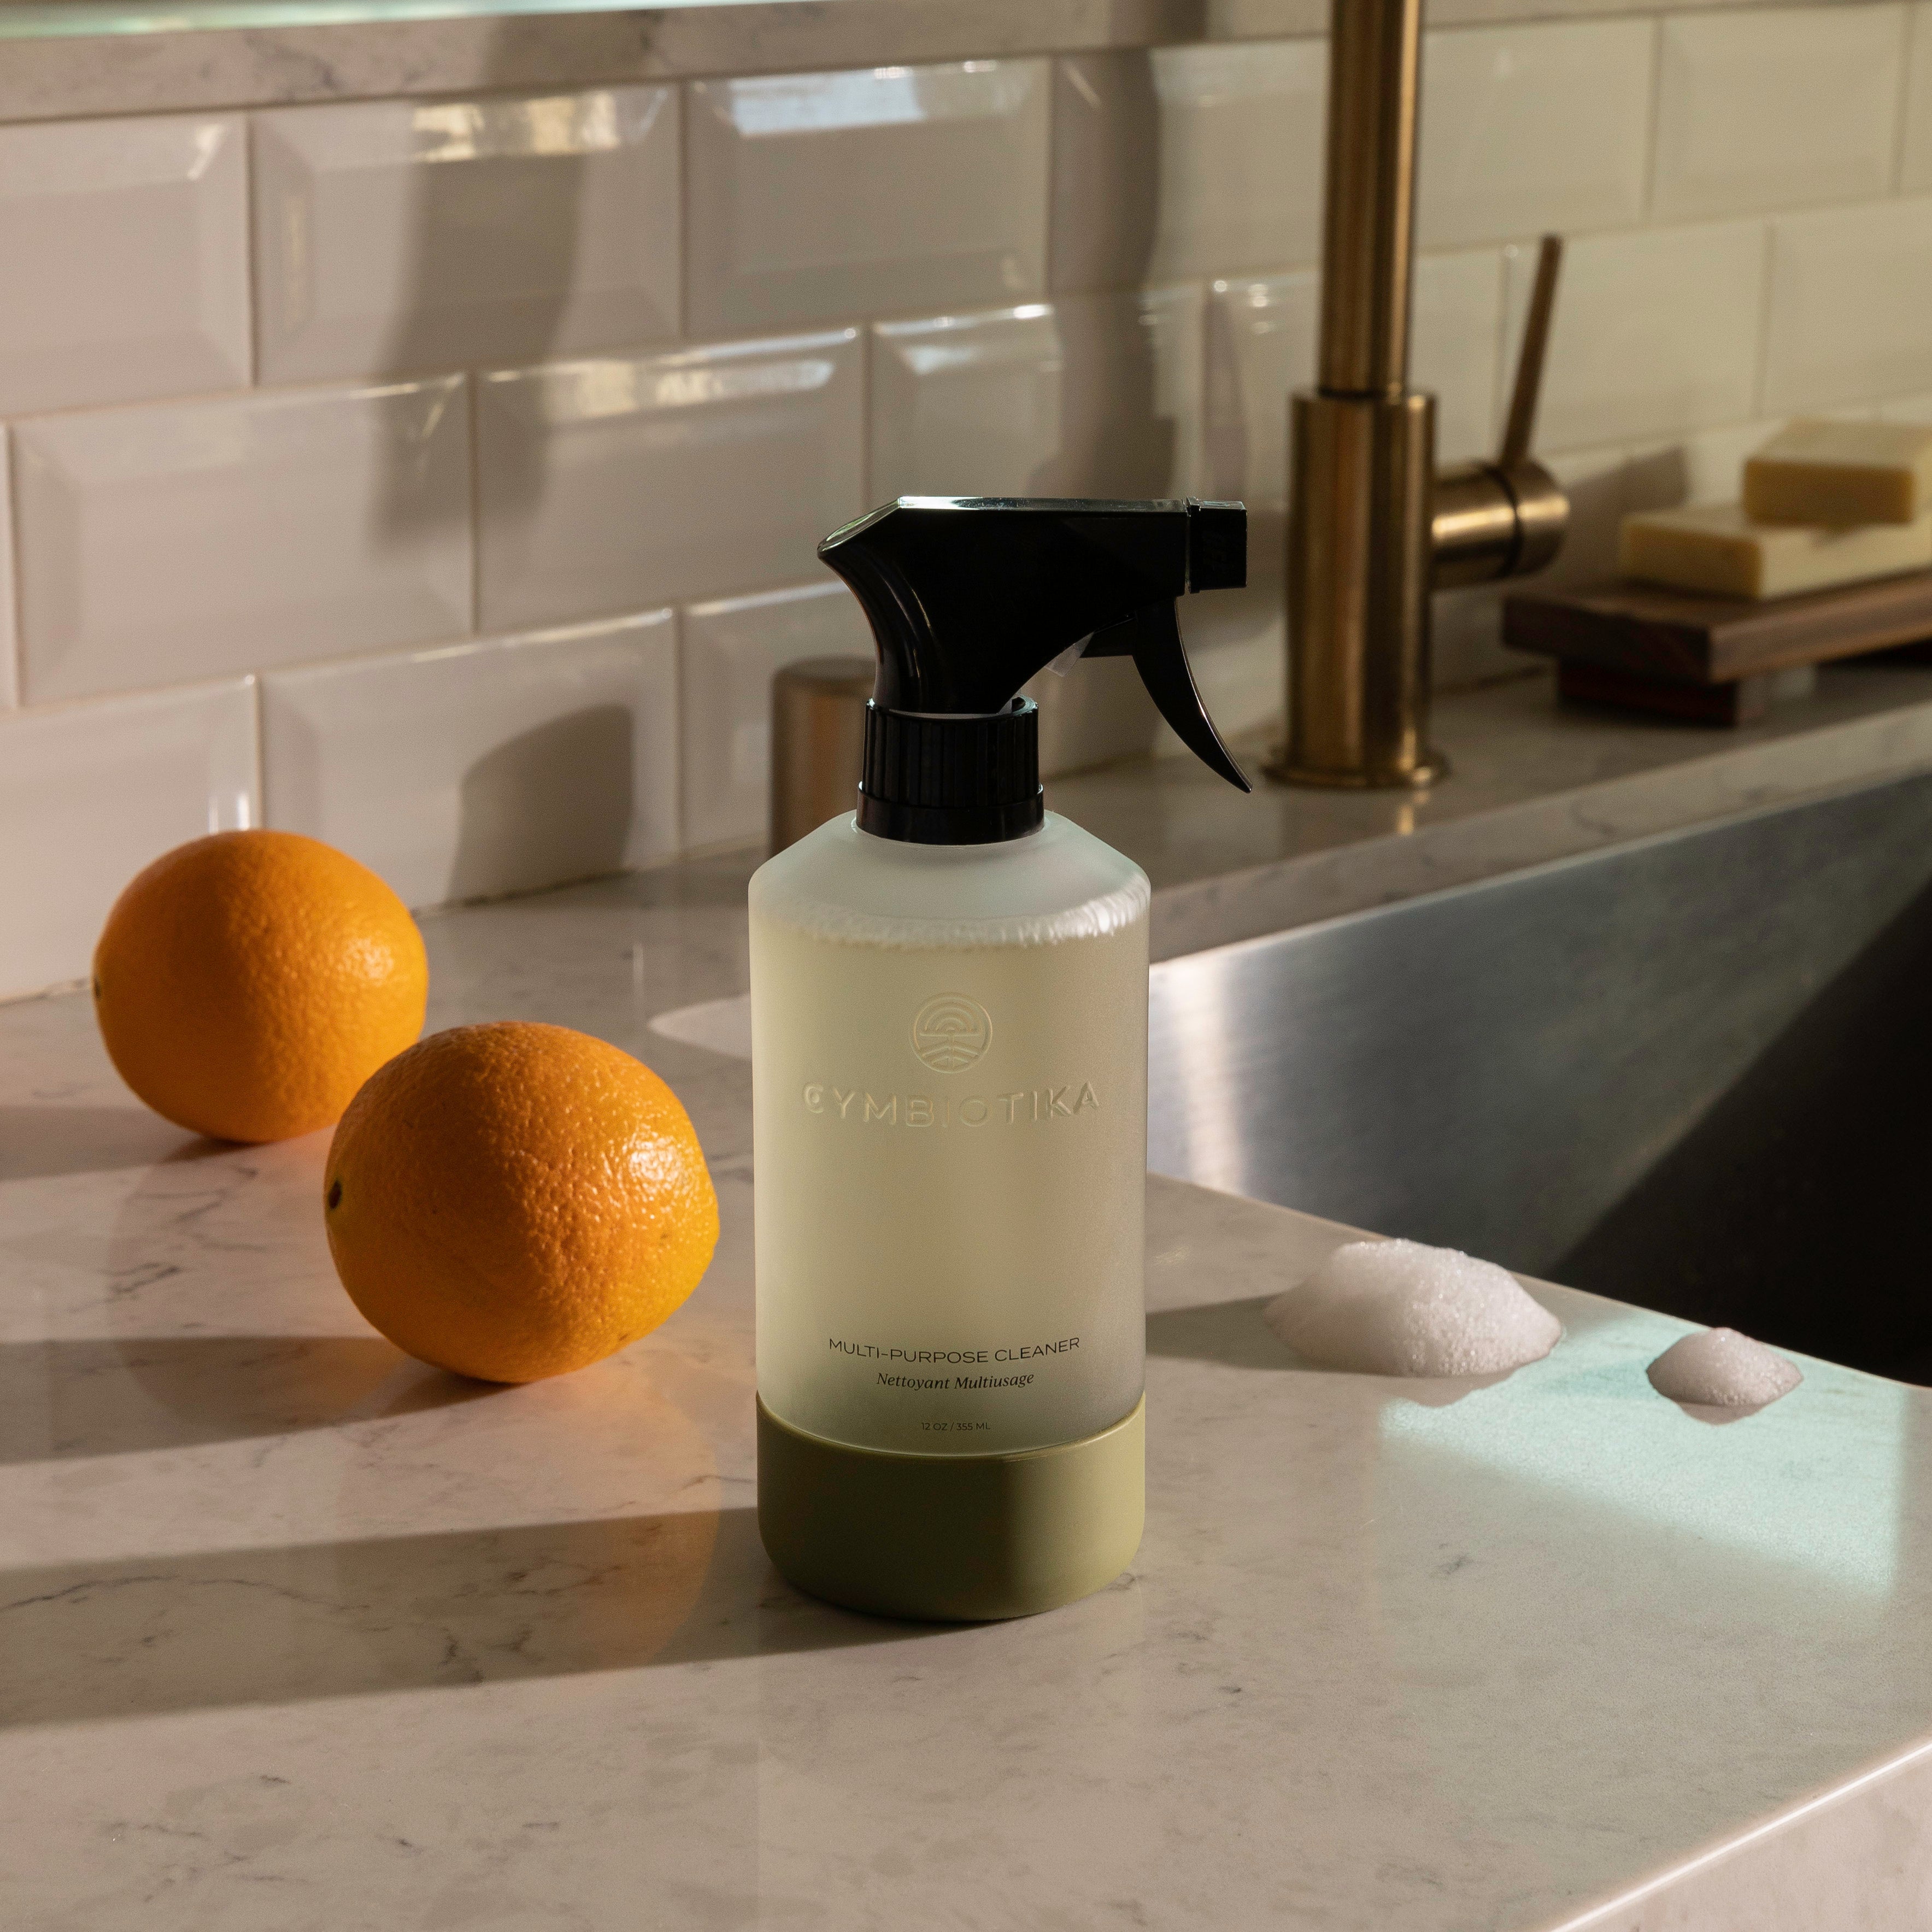 Multi-Purpose Cleaner Bottle next to Oranges on Counter